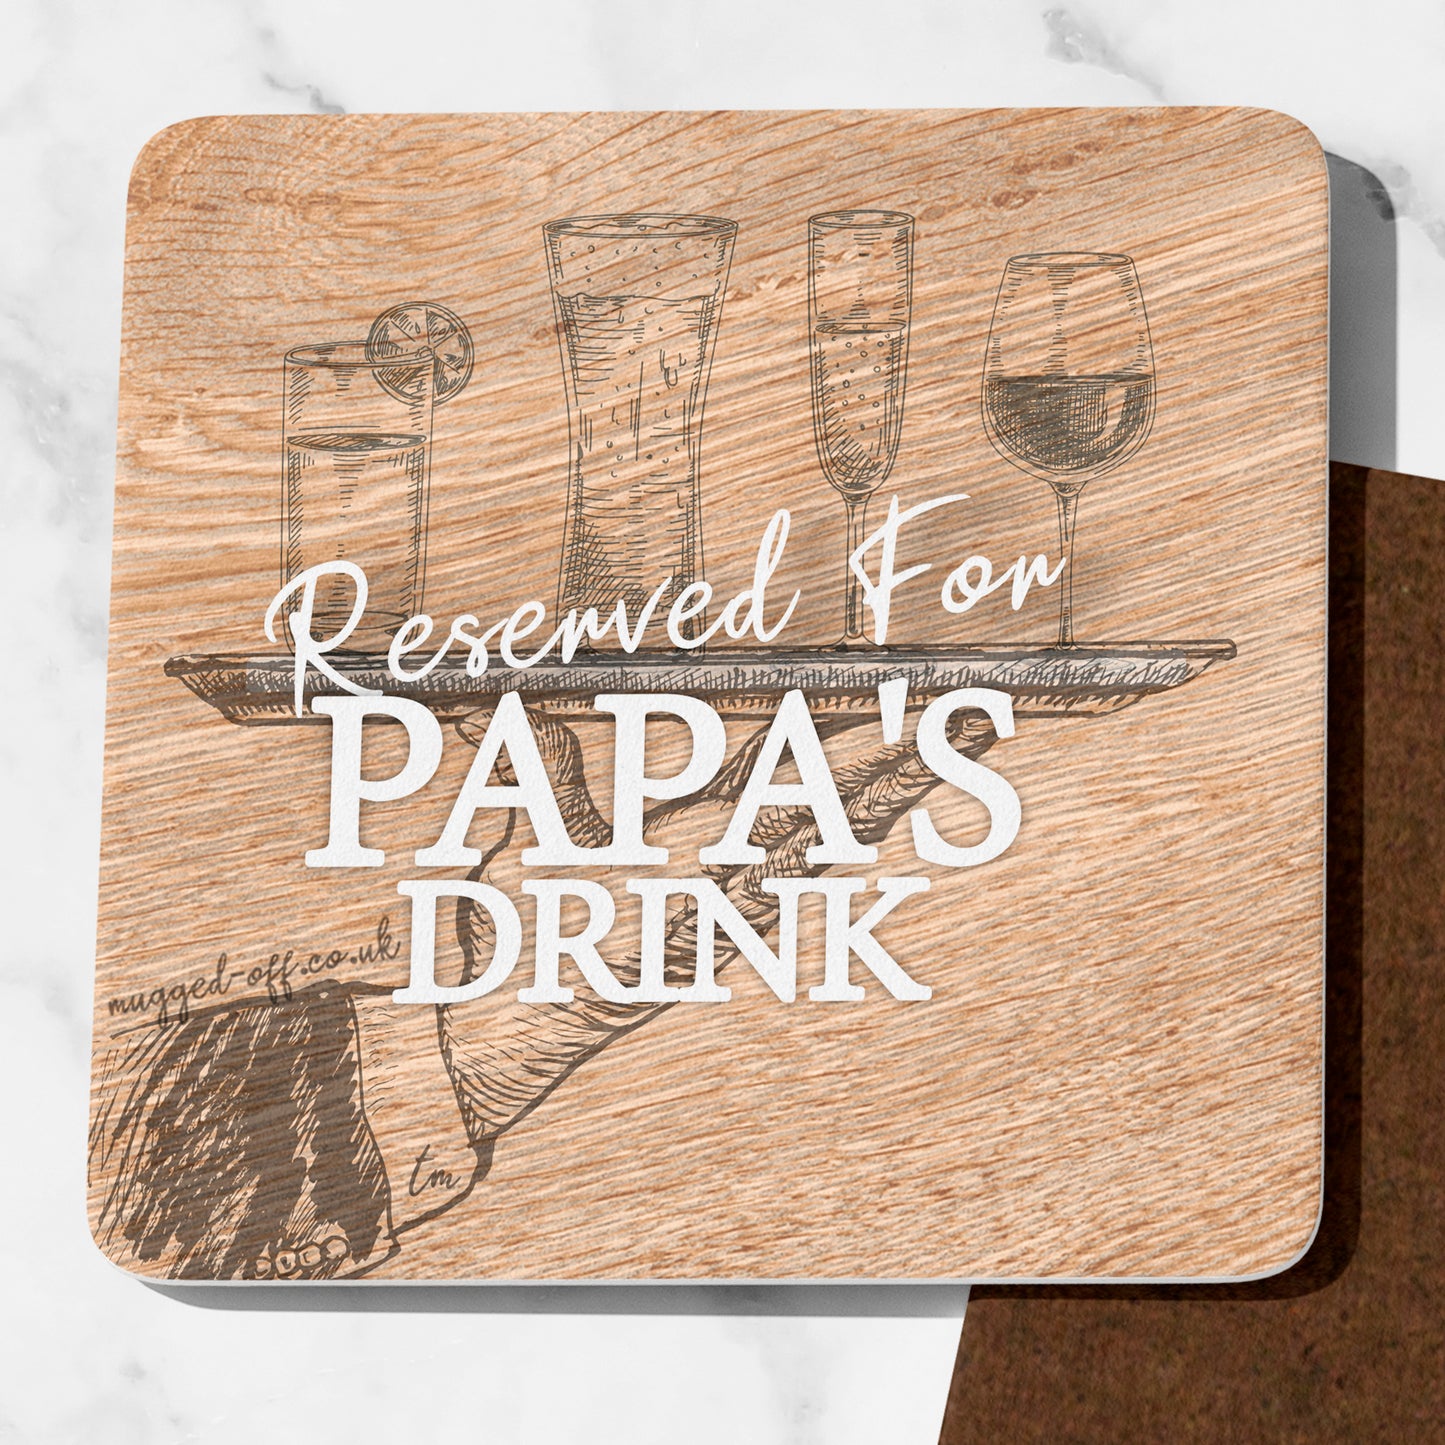 Papa Gifts Reserved For Papa’s Drink wood effect Coaster Present for Papa from Son or Daughter Ideal Dad Gift 9cm x 9cm Drinks Coaster